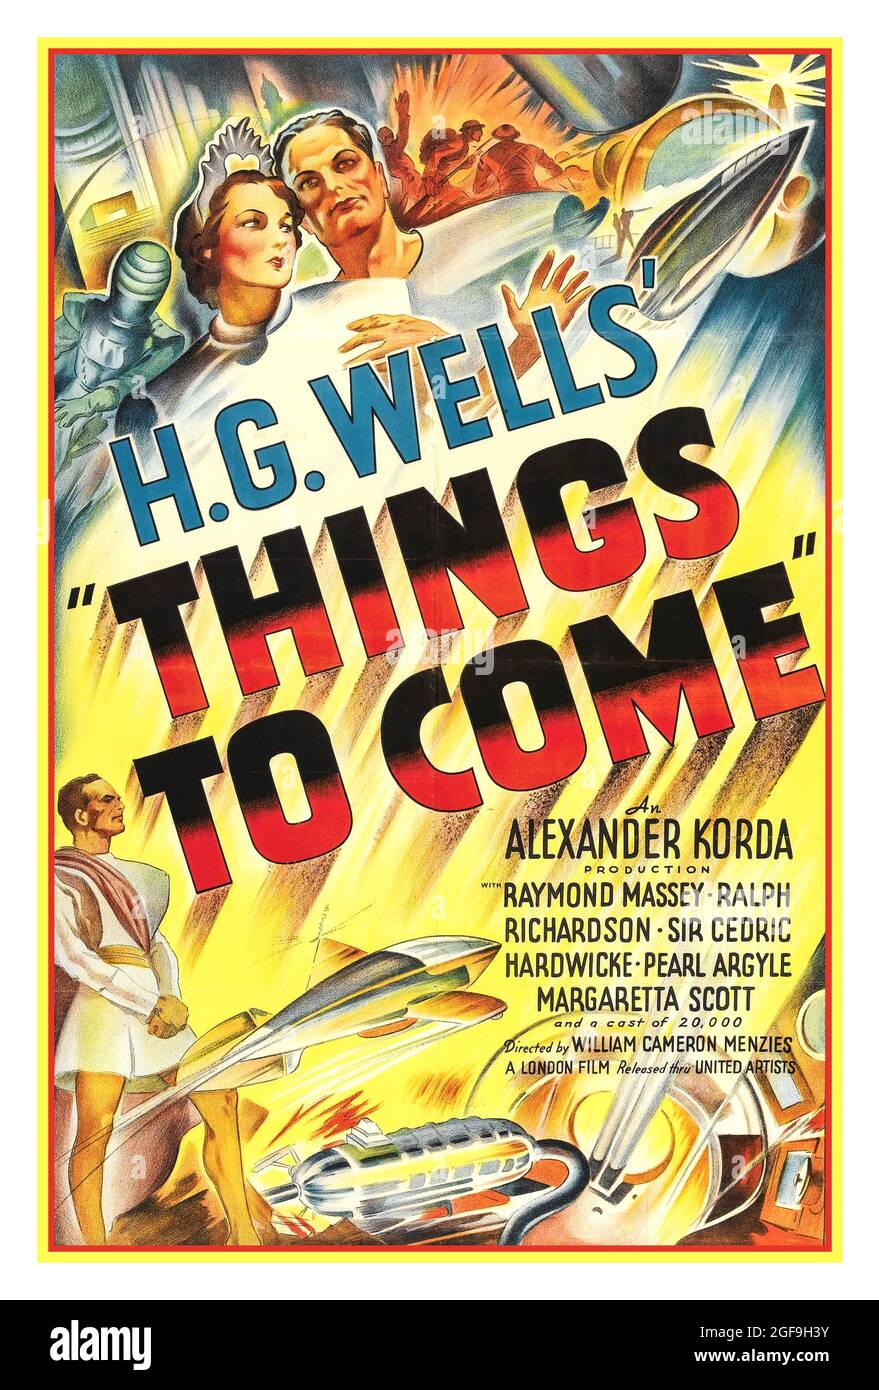 Vintage 1936 Movie Film Poster 'THINGS TO COME' by  H G Wells produced by Alexander Corda. Starring Raymond Massey, Ralph Richardson, Things to Come (also known in promotional material as H. G. Wells' Things to Come) is a 1936 British black-and-white science fiction film from United Artists, produced by Alexander Korda, directed by William Cameron Menzies, and written by H. G. Wells. The film stars Raymond Massey, Edward Chapman, Ralph Richardson, Margaretta Scott, Cedric Hardwicke, Maurice Braddell, Derrick De Marney, and Ann Todd. Stock Photo